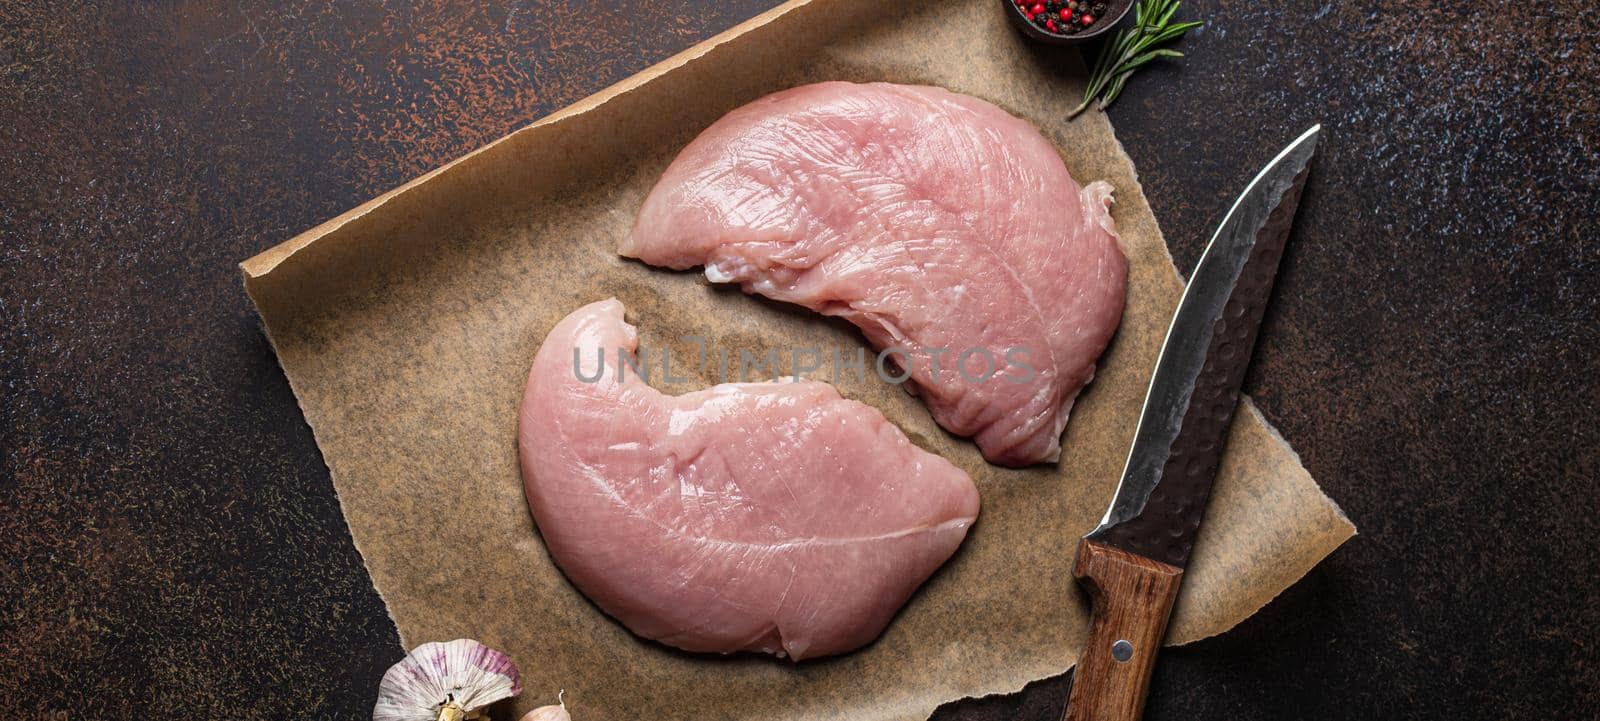 Turkey lean raw fillet on baking paper with rosemary, garlic and spices on dark brown rustic concrete background with knife from above flat lay, healthy diet turkey meat ready to be cooked